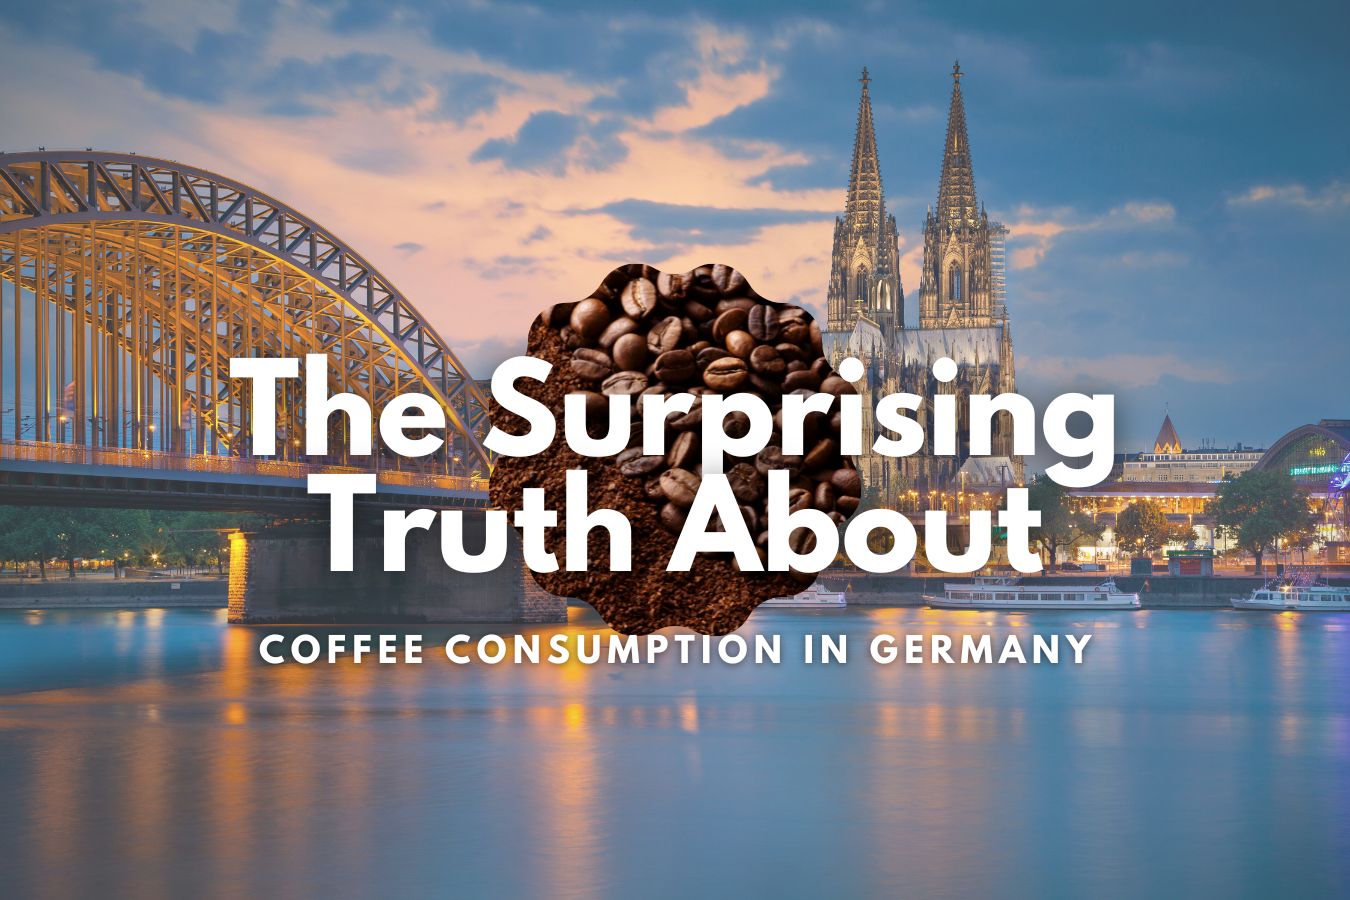 The Surprising Truth About Coffee Consumption in Germany